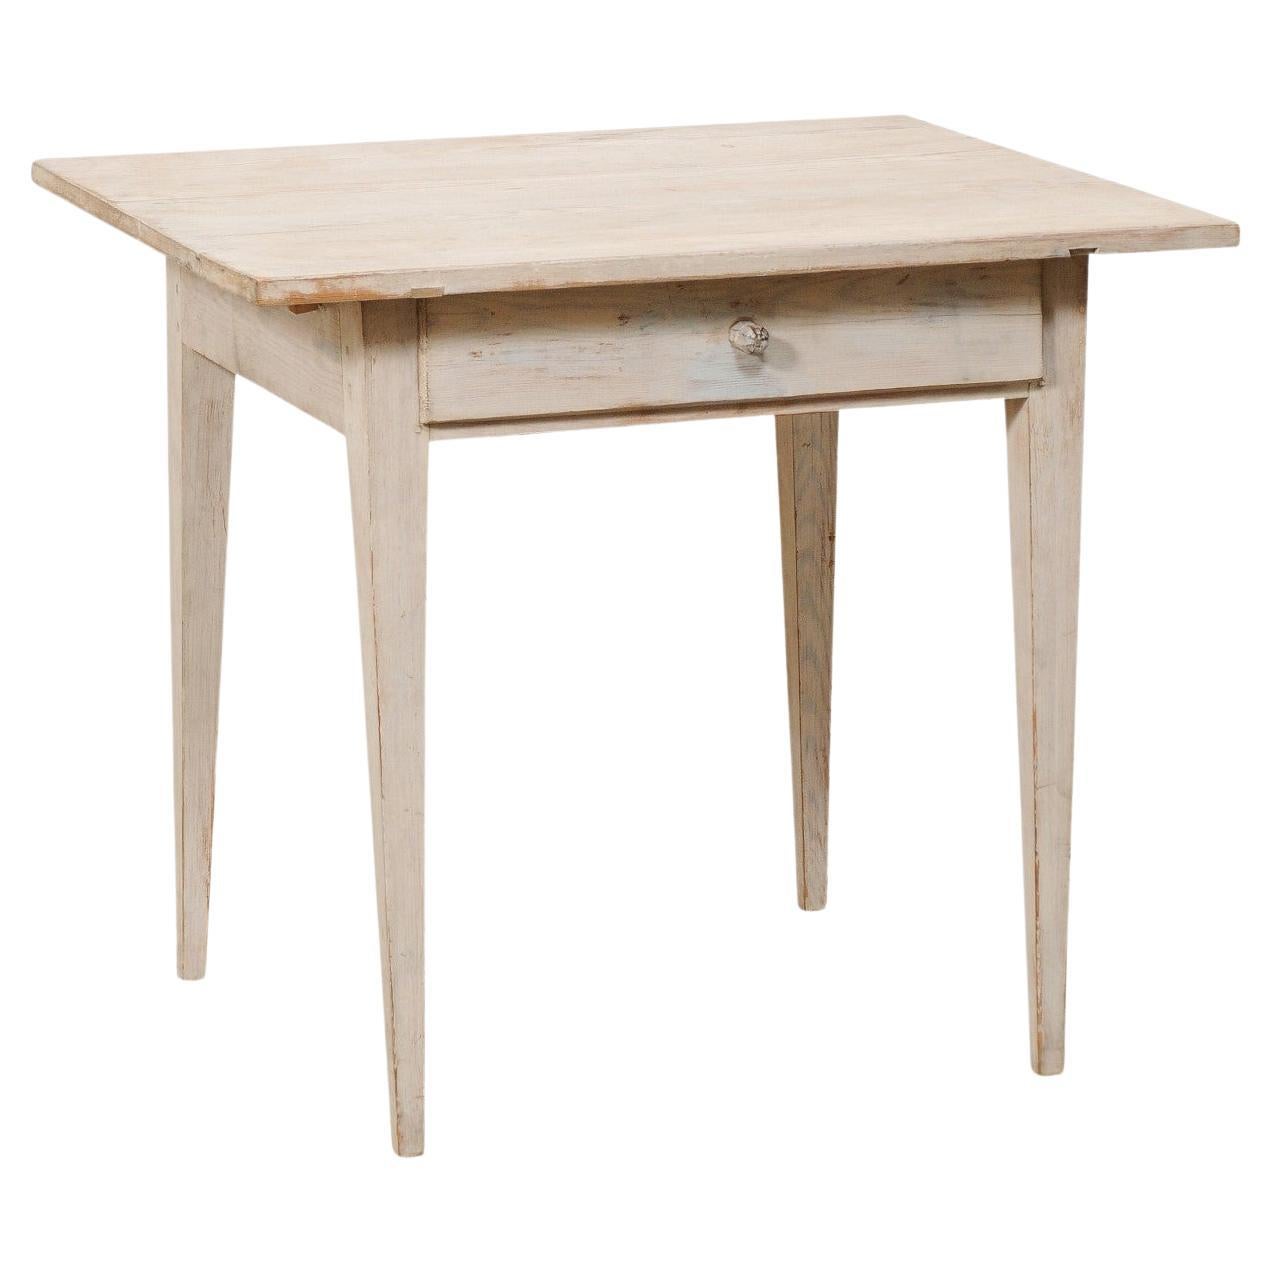 Swedish Period Gustavian Occasional Table with Drawer